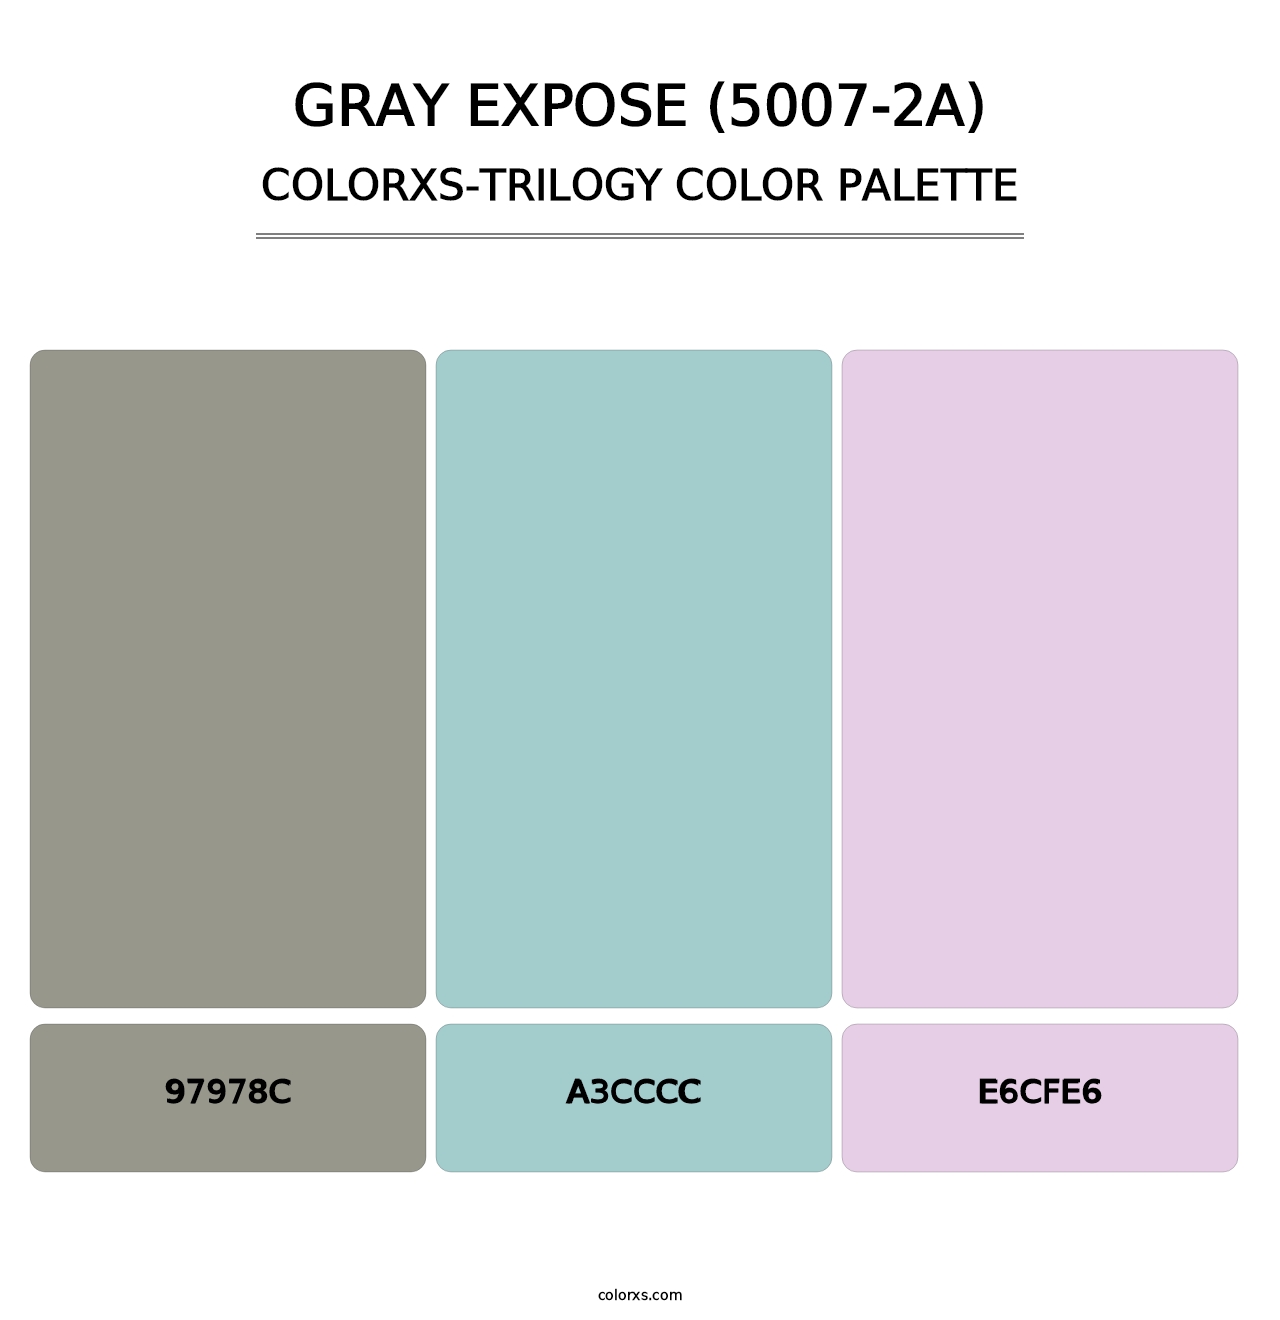 Gray Expose (5007-2A) - Colorxs Trilogy Palette